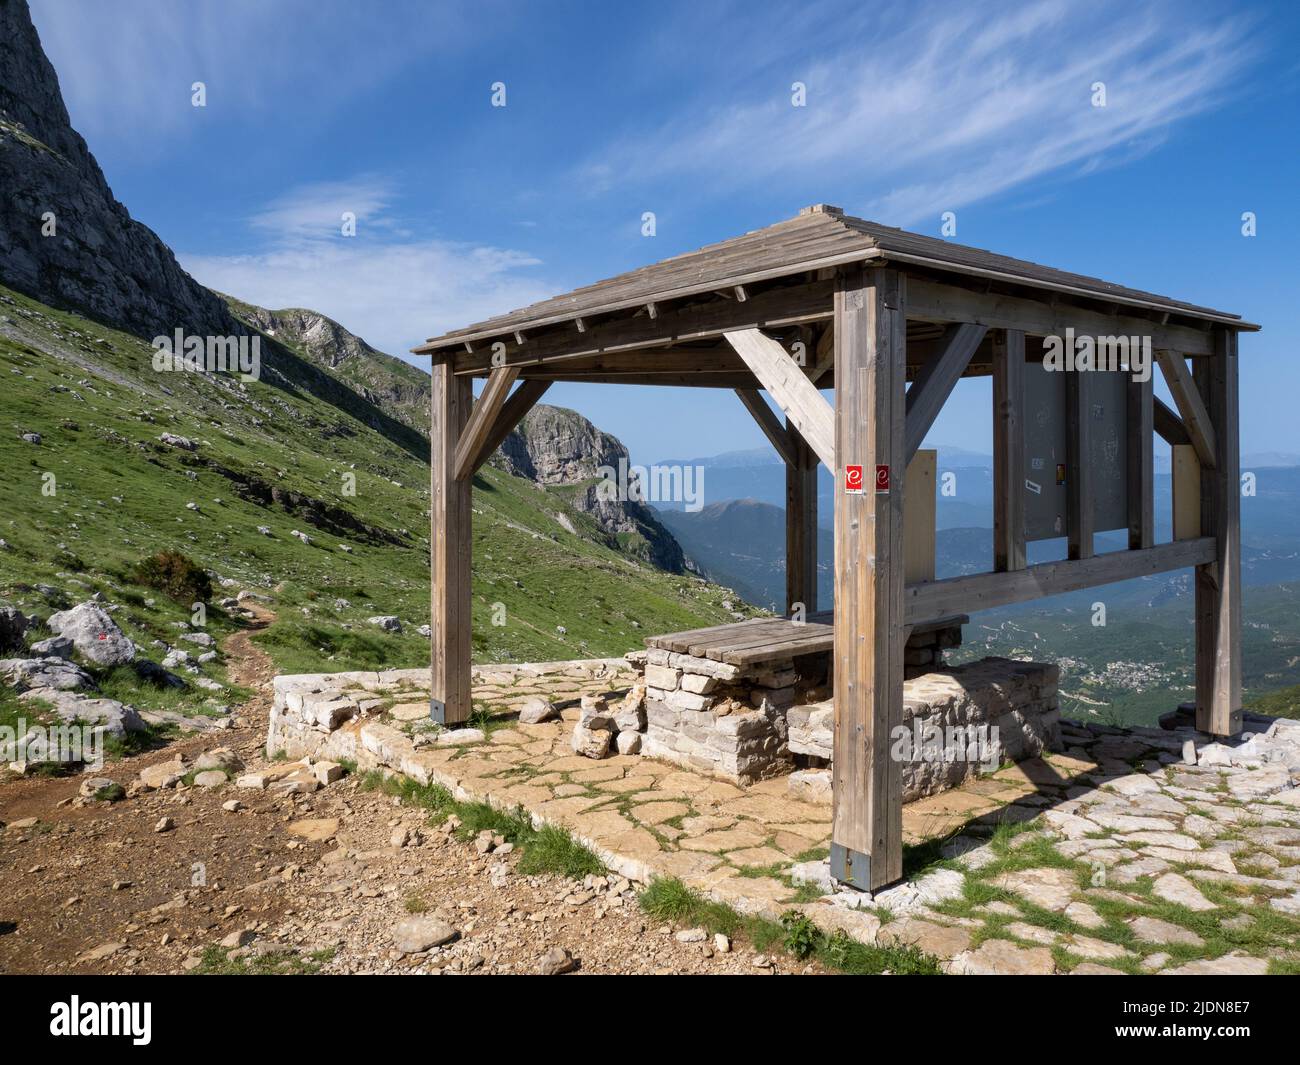 Wooden shelter by a mountain spring on the popular climb from Mikros Gialos and the Astraka refuge below mount Astraka in the Zagori region of Greece Stock Photo